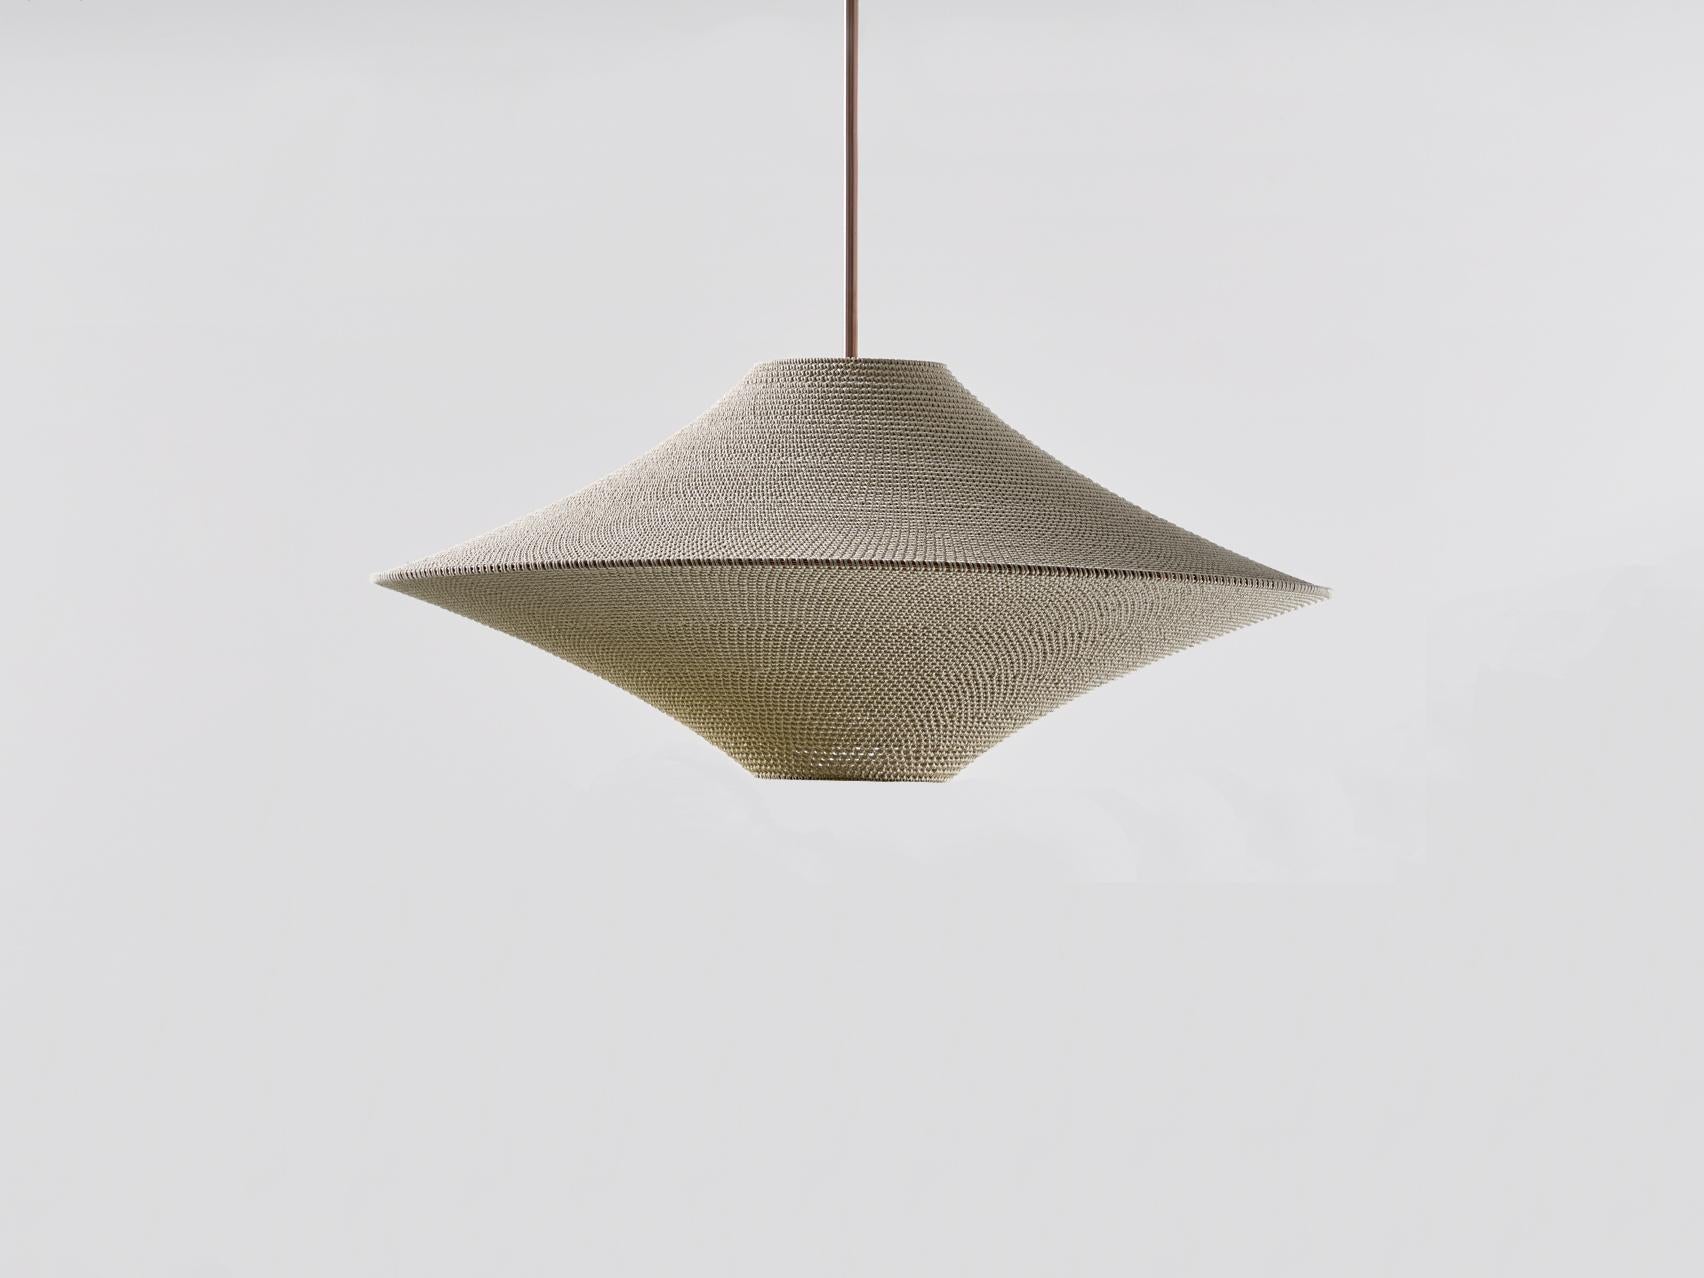 Large Solitaire pendant lamp by Naomi Paul
Dimensions: D 80 x H 37 cm
Materials: metal frame, Egyptian cotton cord.
Color: Ecru.
Available in other colors and in 5 sizes: D34, D50, D60, D80, D100 cm.
Available in plain, trim, 50/50 or bamboo